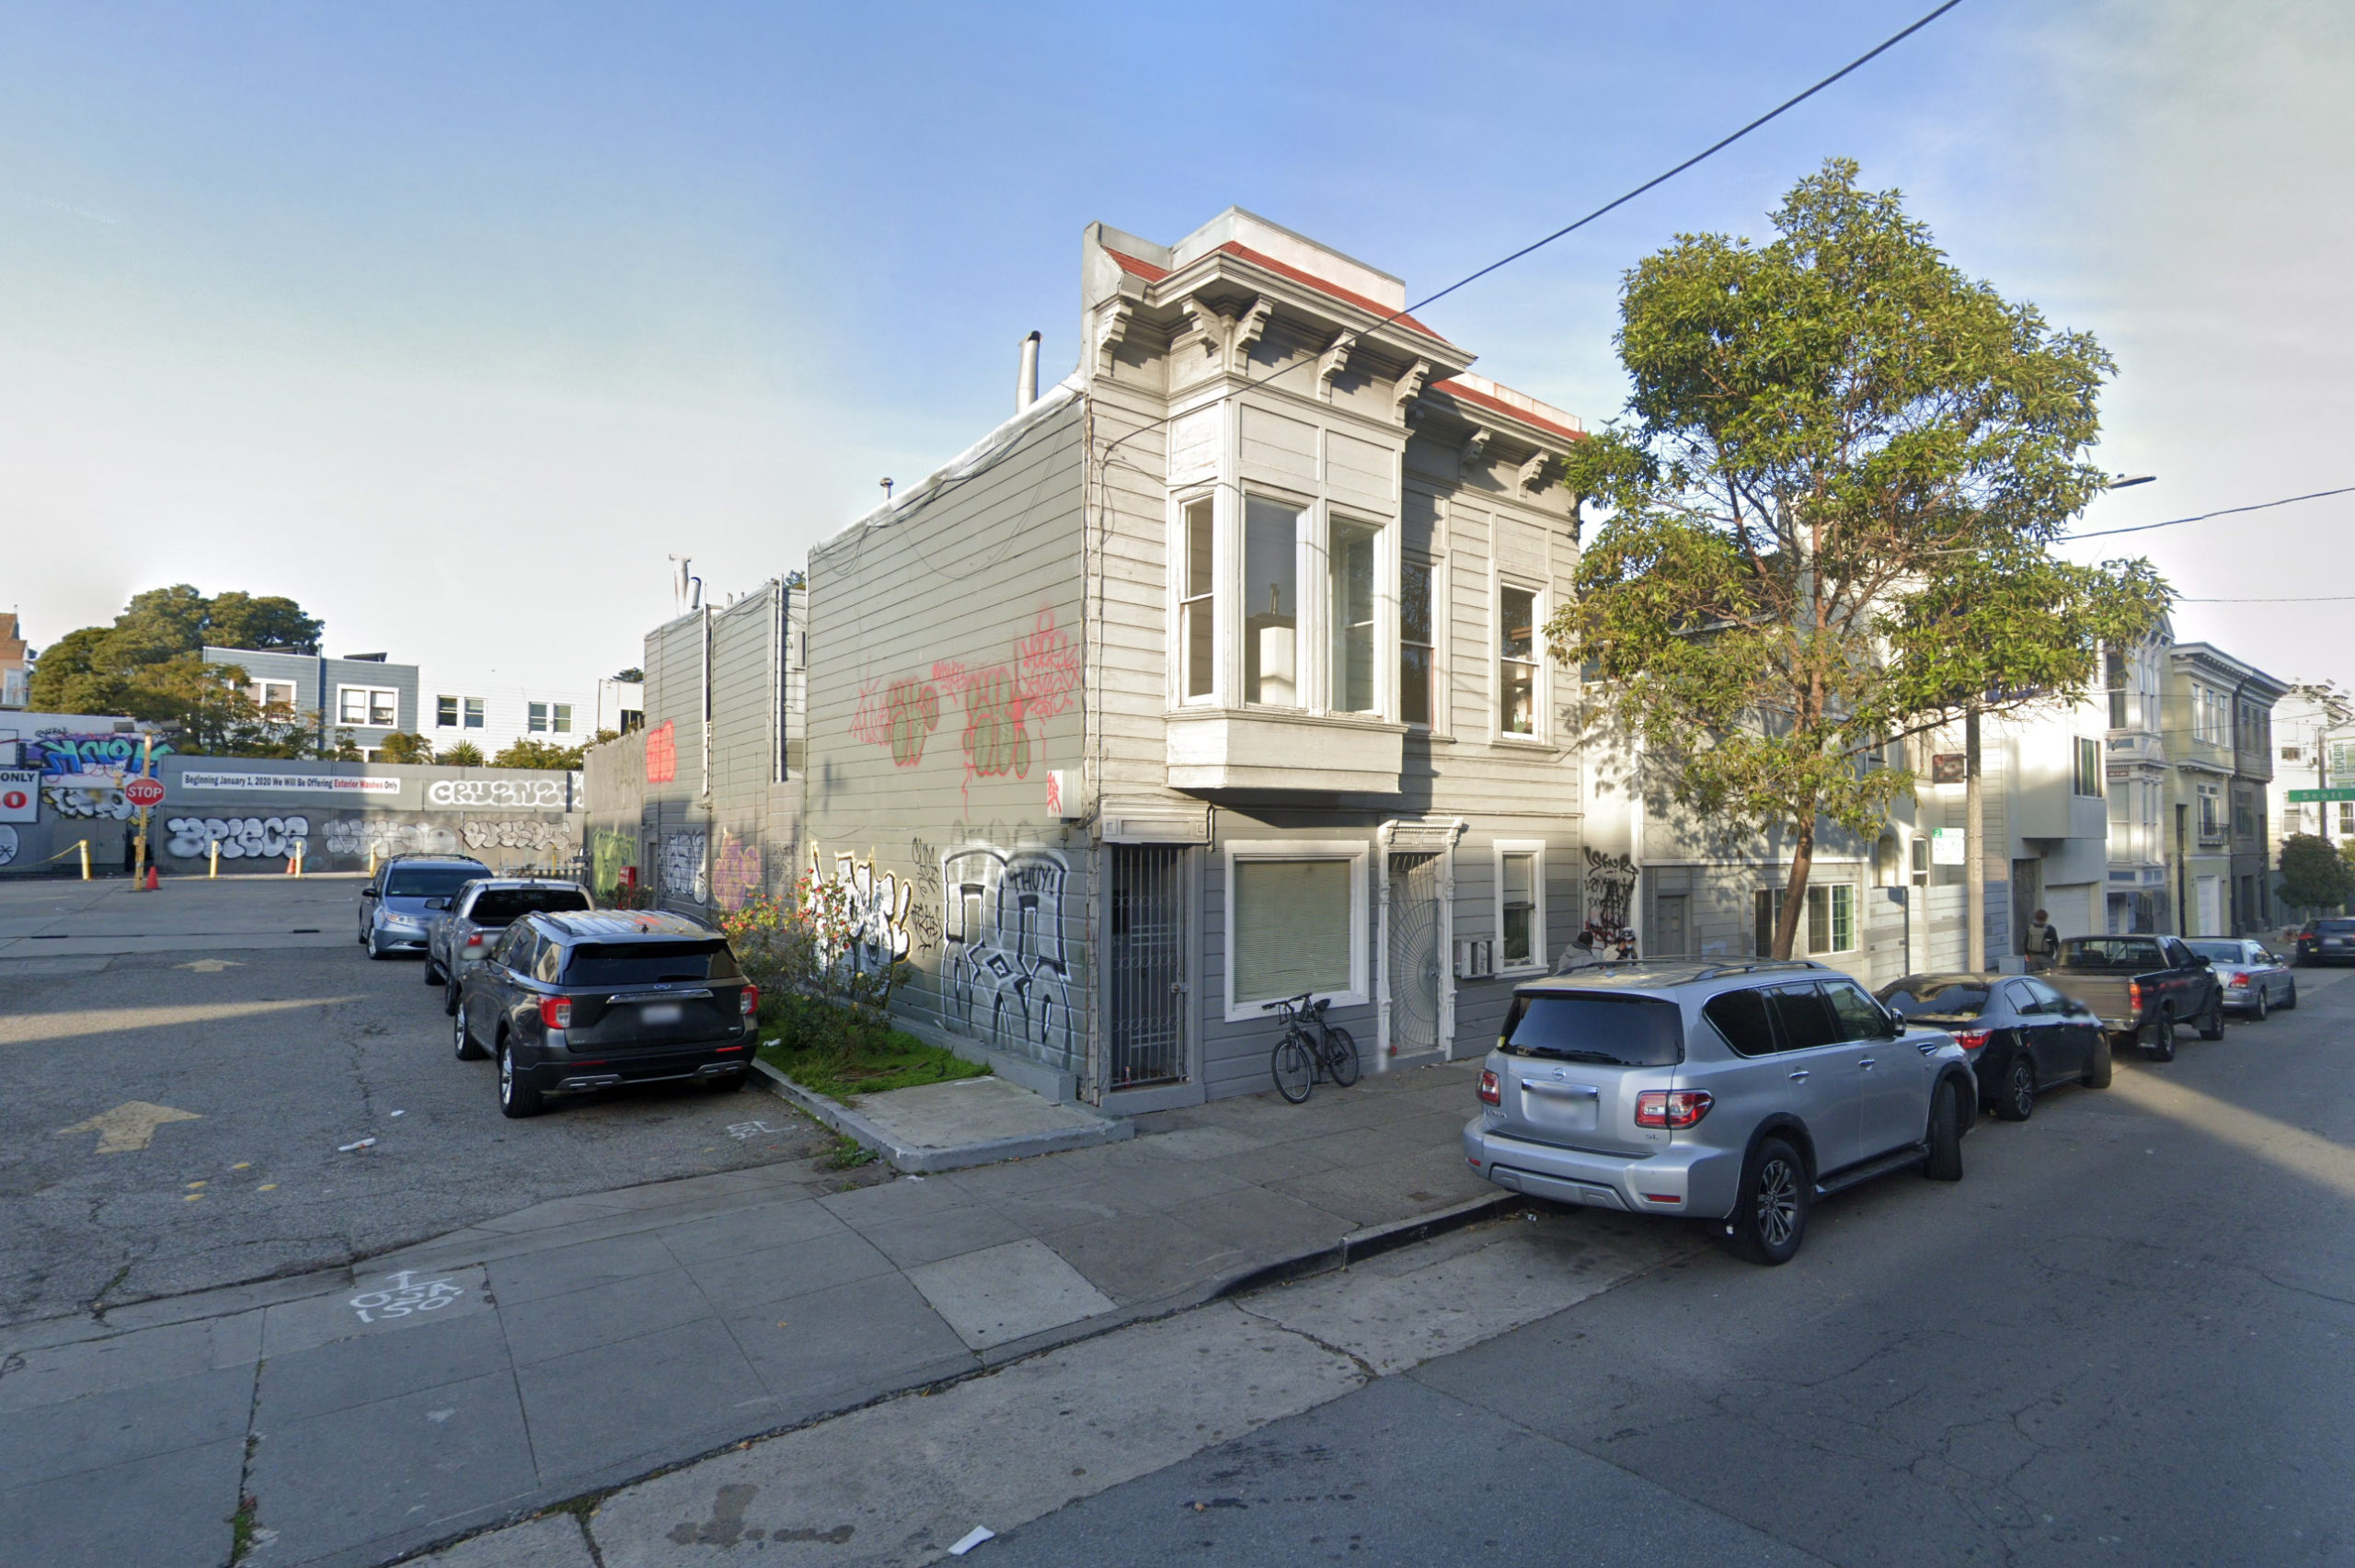 As part of plans for 400 Divisadero Street, 1060-1062 Oak Street will be moved 49 feet east to a new location, image courtesy Google Street View